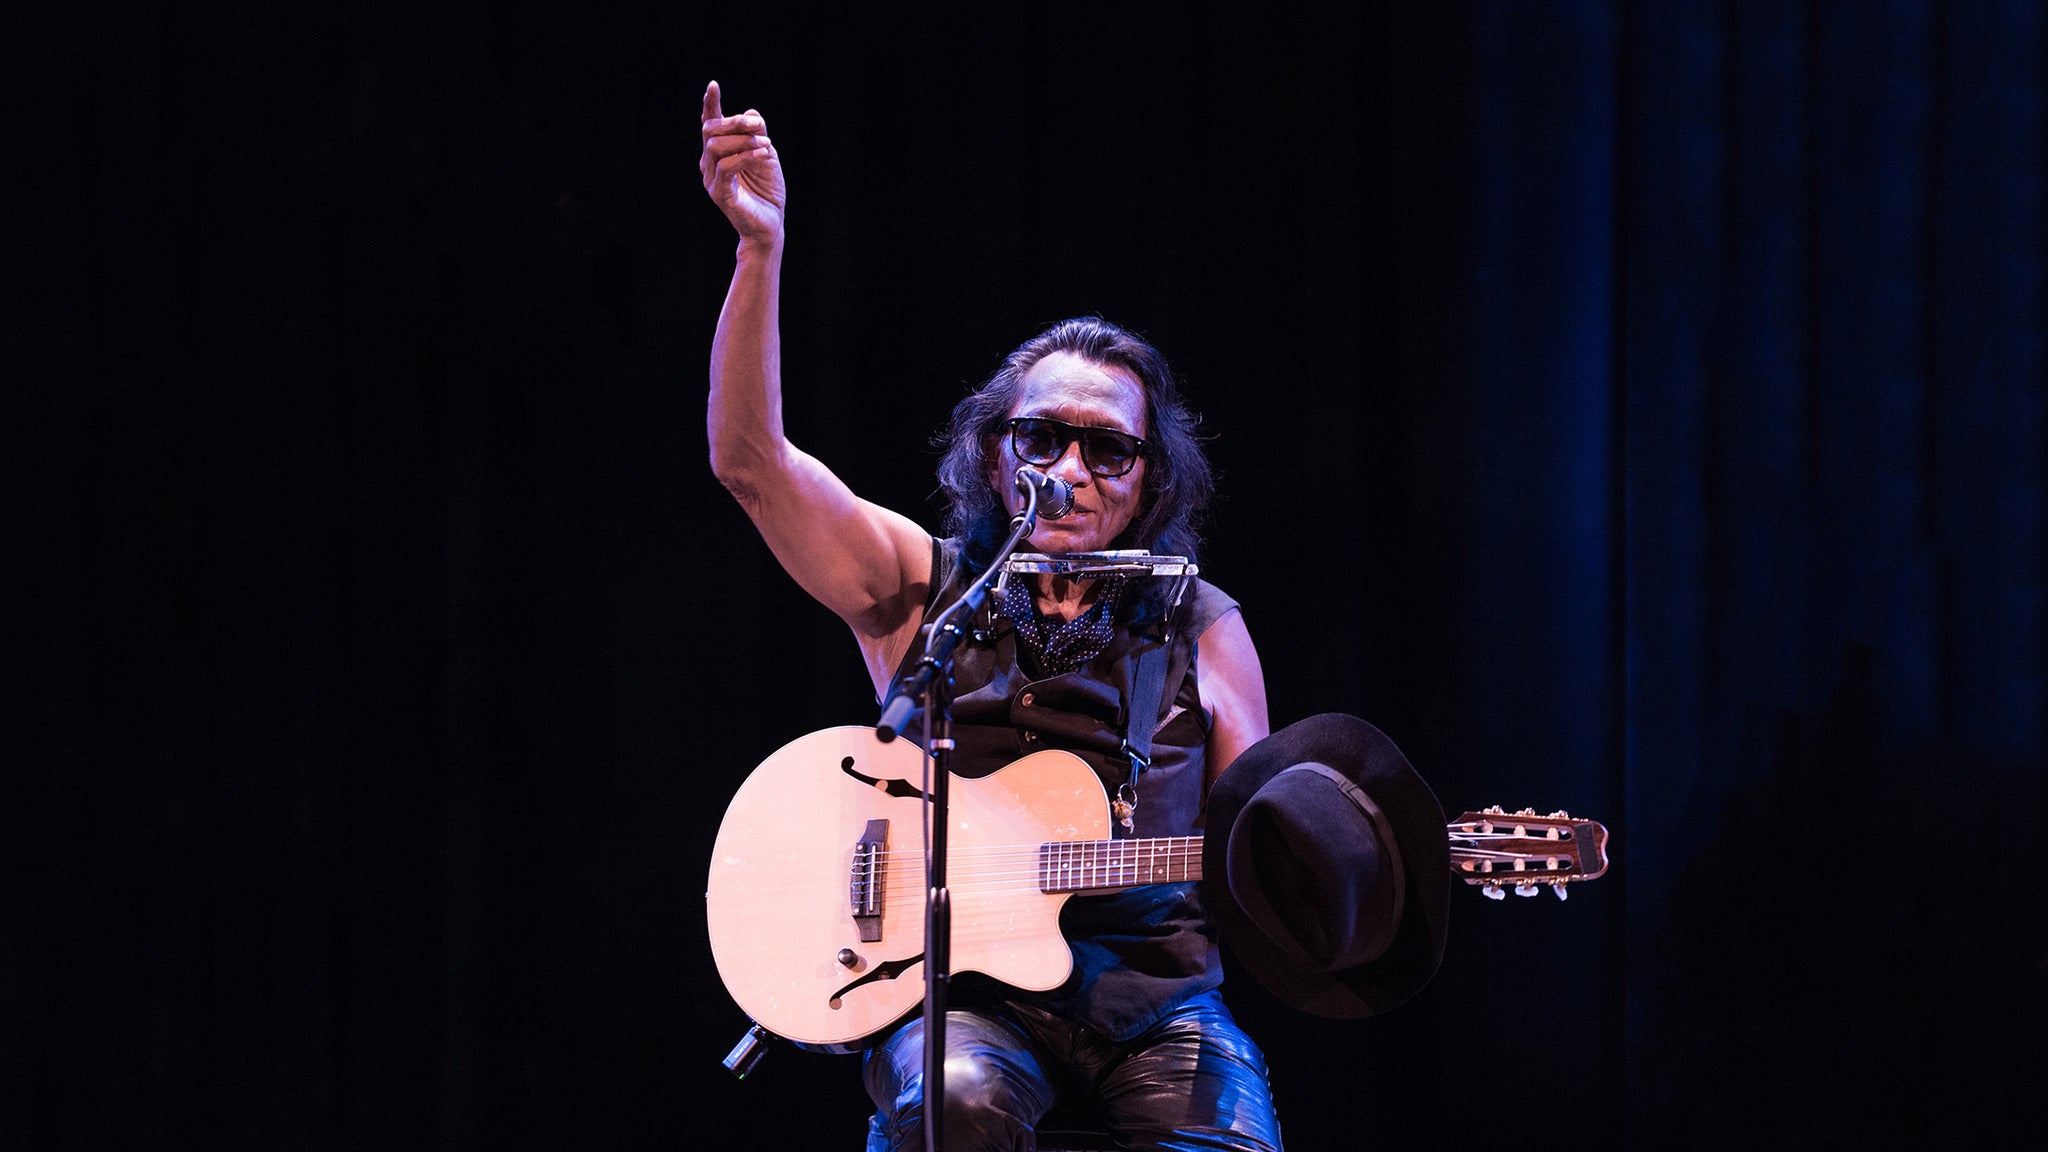 Rodriguez in Calgary promo photo for Live Nation presale offer code